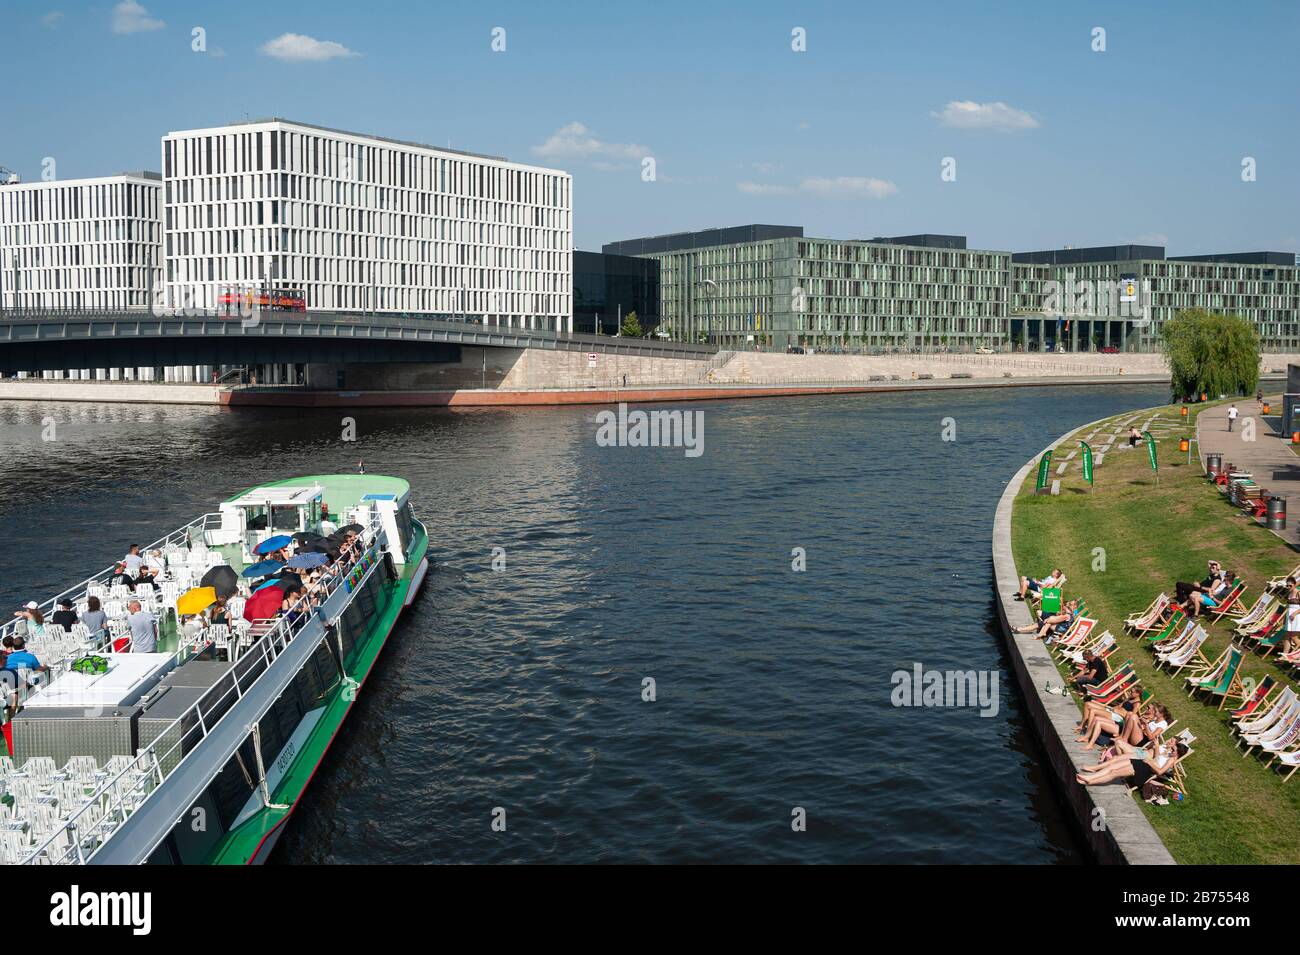 12.06.2019, Berlin, Germany, Europe - Beach bar Capital Beach at the Ludwig-Erhard-Ufer along the river Spree in the government quarter in Mitte. [automated translation] Stock Photo